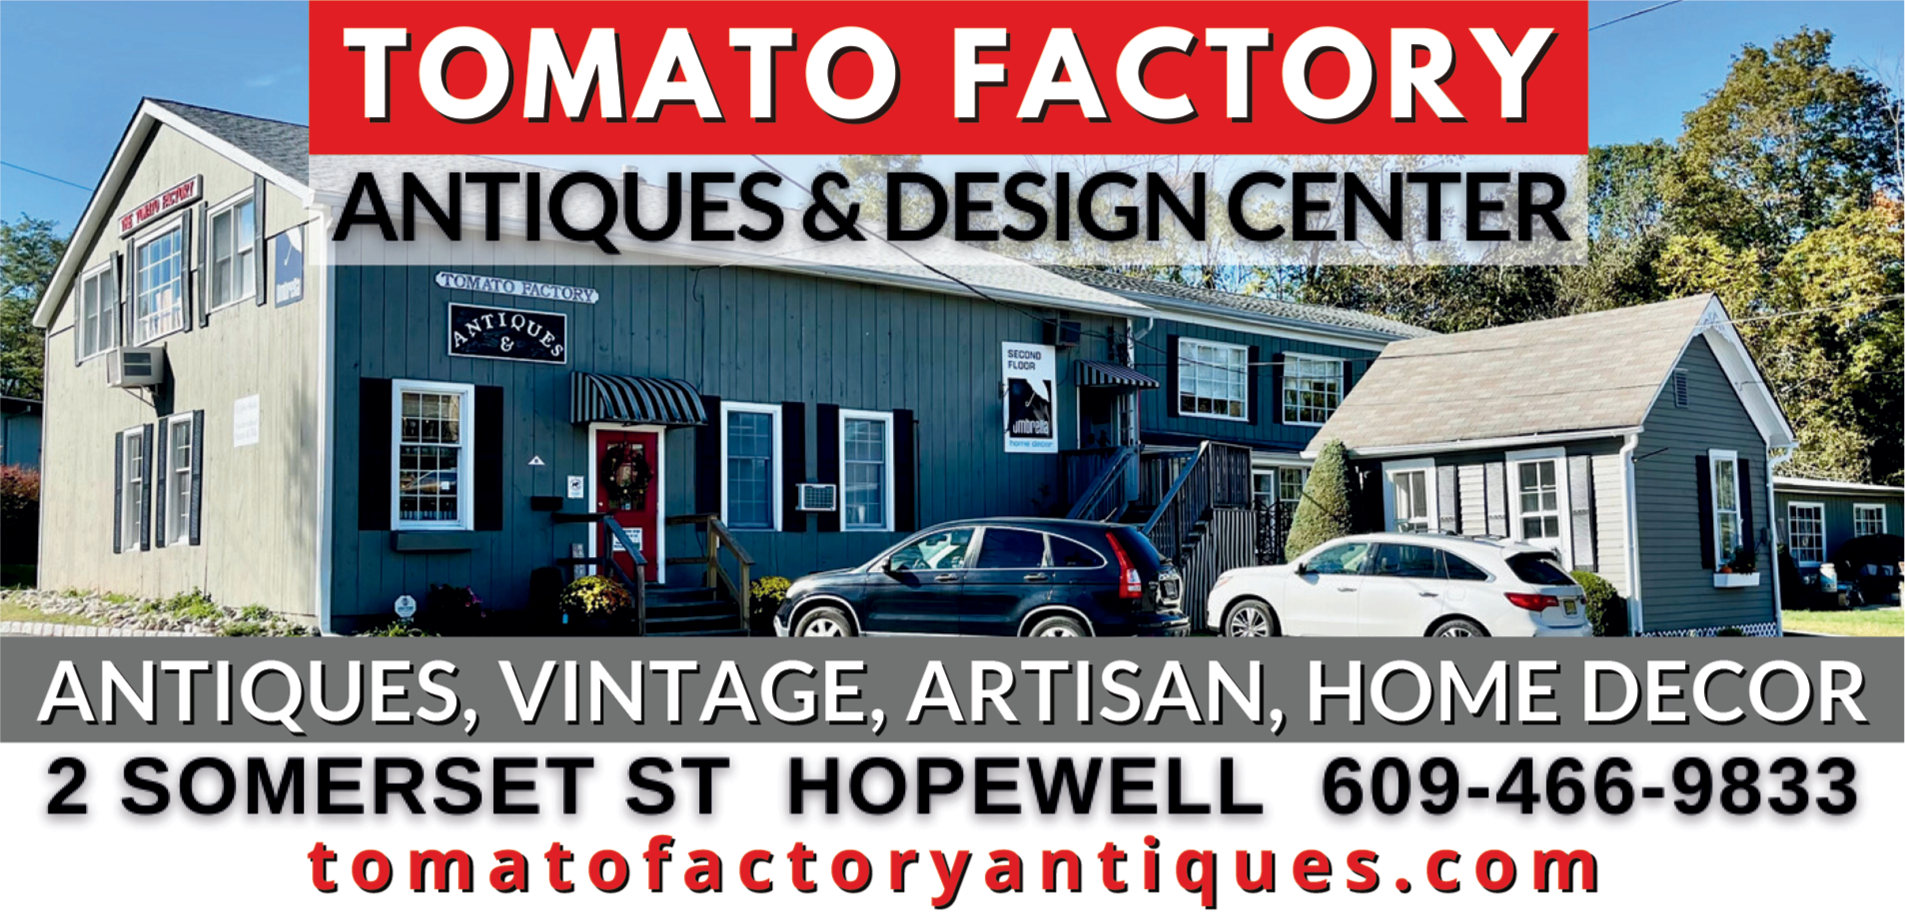 The Tomato Factory Antiques Center Print Ad